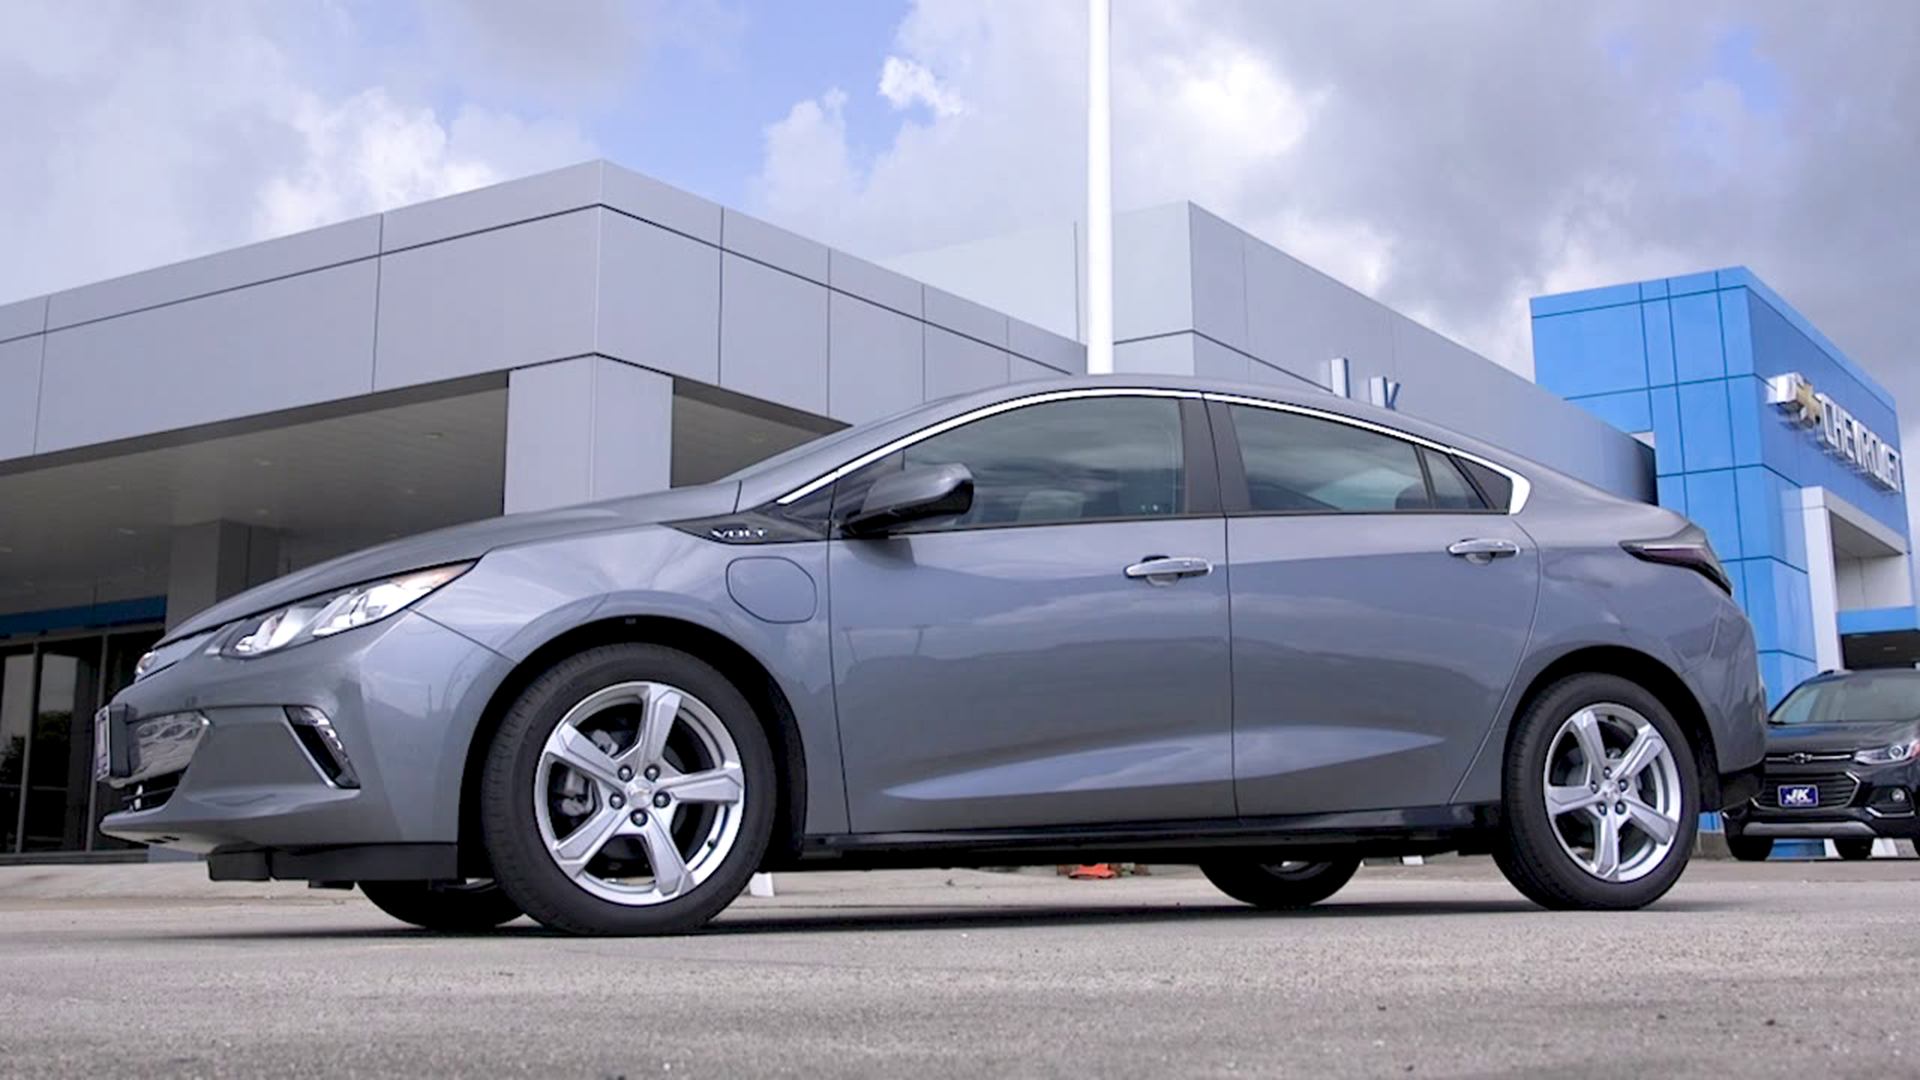 Check out this 2019 Chevrolet Volt hybrid electric car from JK Chevrolet in Nederland. Call (409) 726-8905 or visit http://JKChevrolet.com to get yours!